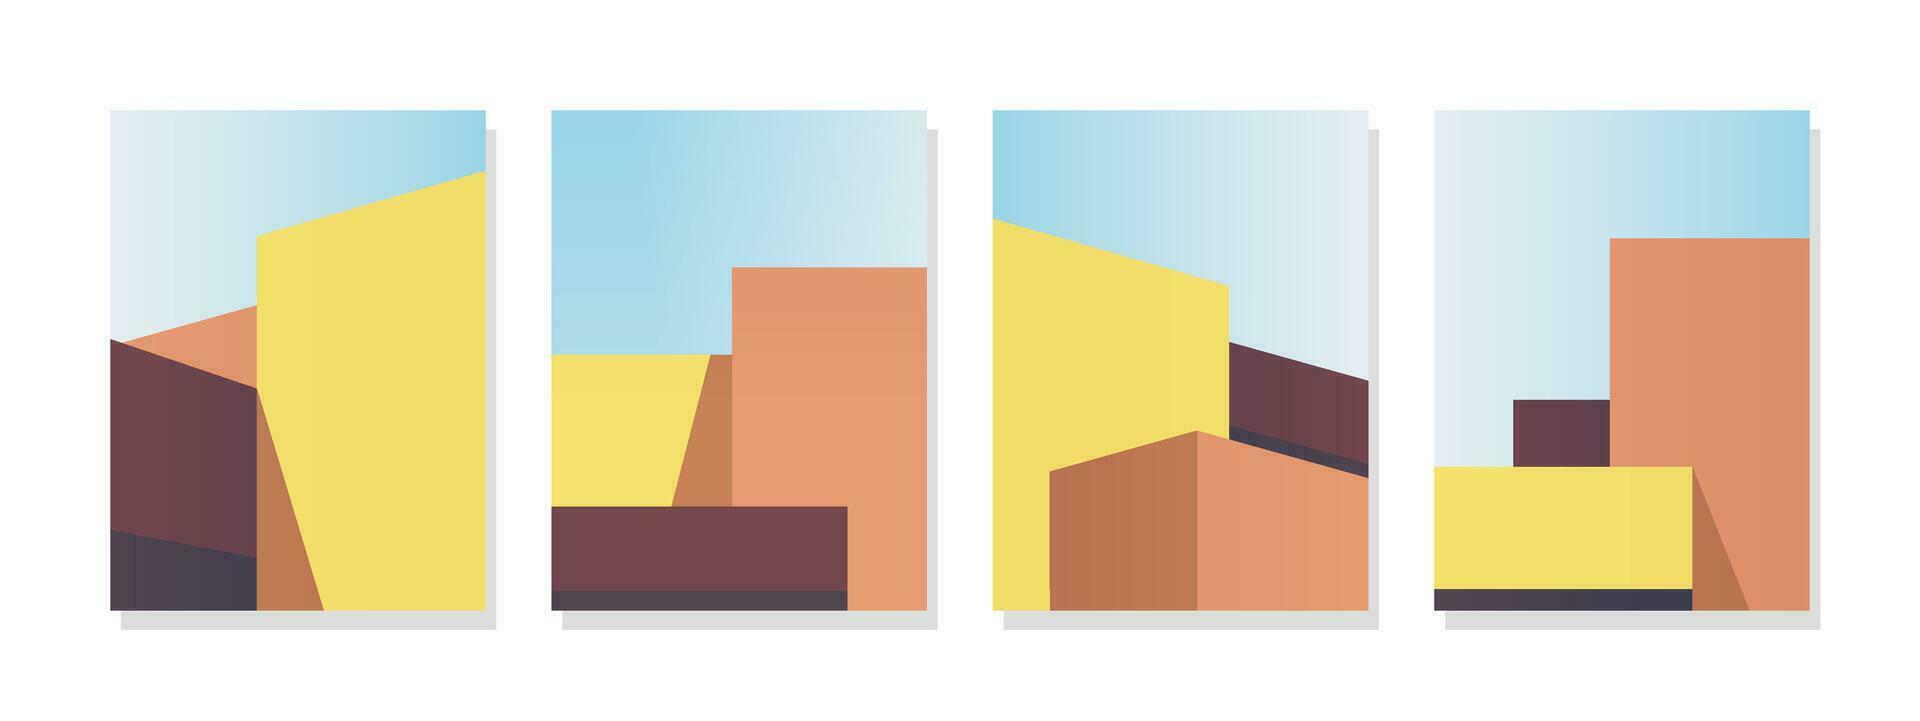 Abstract depiction of geometric buildings in a minimalist modern art style. Facade shapes against a clear sky background. Bright colors ideal for wall art, posters, banners, cards, and decorations. vector